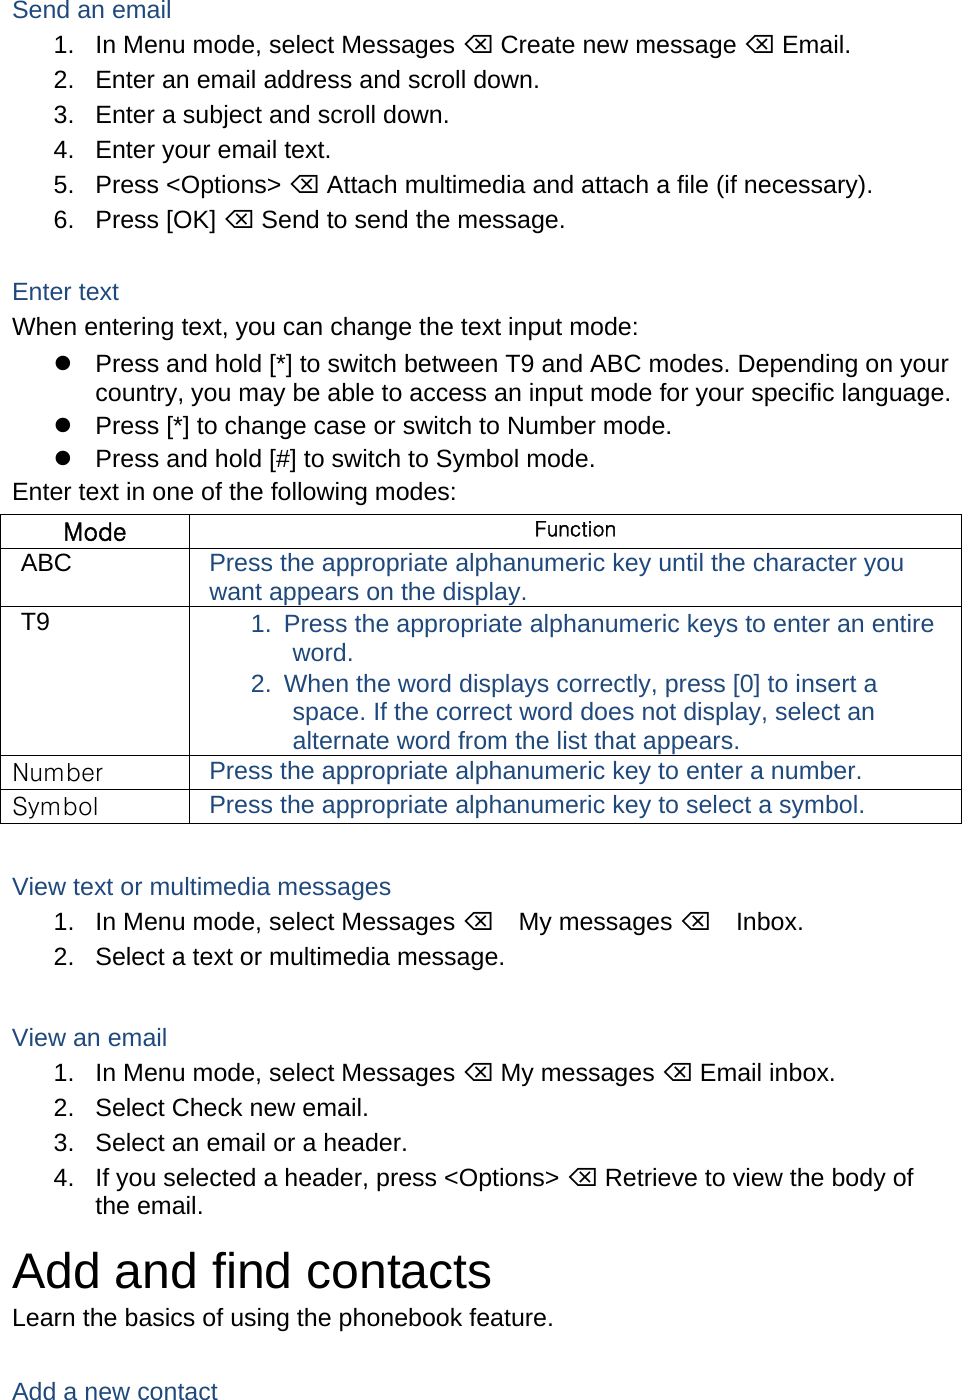 Send an email 1.  In Menu mode, select Messages  Create new message  Email. 2.  Enter an email address and scroll down. 3.  Enter a subject and scroll down. 4.  Enter your email text. 5. Press &lt;Options&gt;  Attach multimedia and attach a file (if necessary). 6. Press [OK]  Send to send the message.  Enter text When entering text, you can change the text input mode:   Press and hold [*] to switch between T9 and ABC modes. Depending on your country, you may be able to access an input mode for your specific language.   Press [*] to change case or switch to Number mode.   Press and hold [#] to switch to Symbol mode. Enter text in one of the following modes: Mode  Function ABC  Press the appropriate alphanumeric key until the character you want appears on the display. T9  1.  Press the appropriate alphanumeric keys to enter an entire word. 2.  When the word displays correctly, press [0] to insert a space. If the correct word does not display, select an alternate word from the list that appears. Number  Press the appropriate alphanumeric key to enter a number. Symbol  Press the appropriate alphanumeric key to select a symbol.  View text or multimedia messages 1.  In Menu mode, select Messages My messages Inbox. 2.  Select a text or multimedia message.  View an email 1.  In Menu mode, select Messages  My messages  Email inbox. 2.  Select Check new email. 3.  Select an email or a header. 4.  If you selected a header, press &lt;Options&gt;  Retrieve to view the body of the email. Add and find contacts Learn the basics of using the phonebook feature.  Add a new contact 